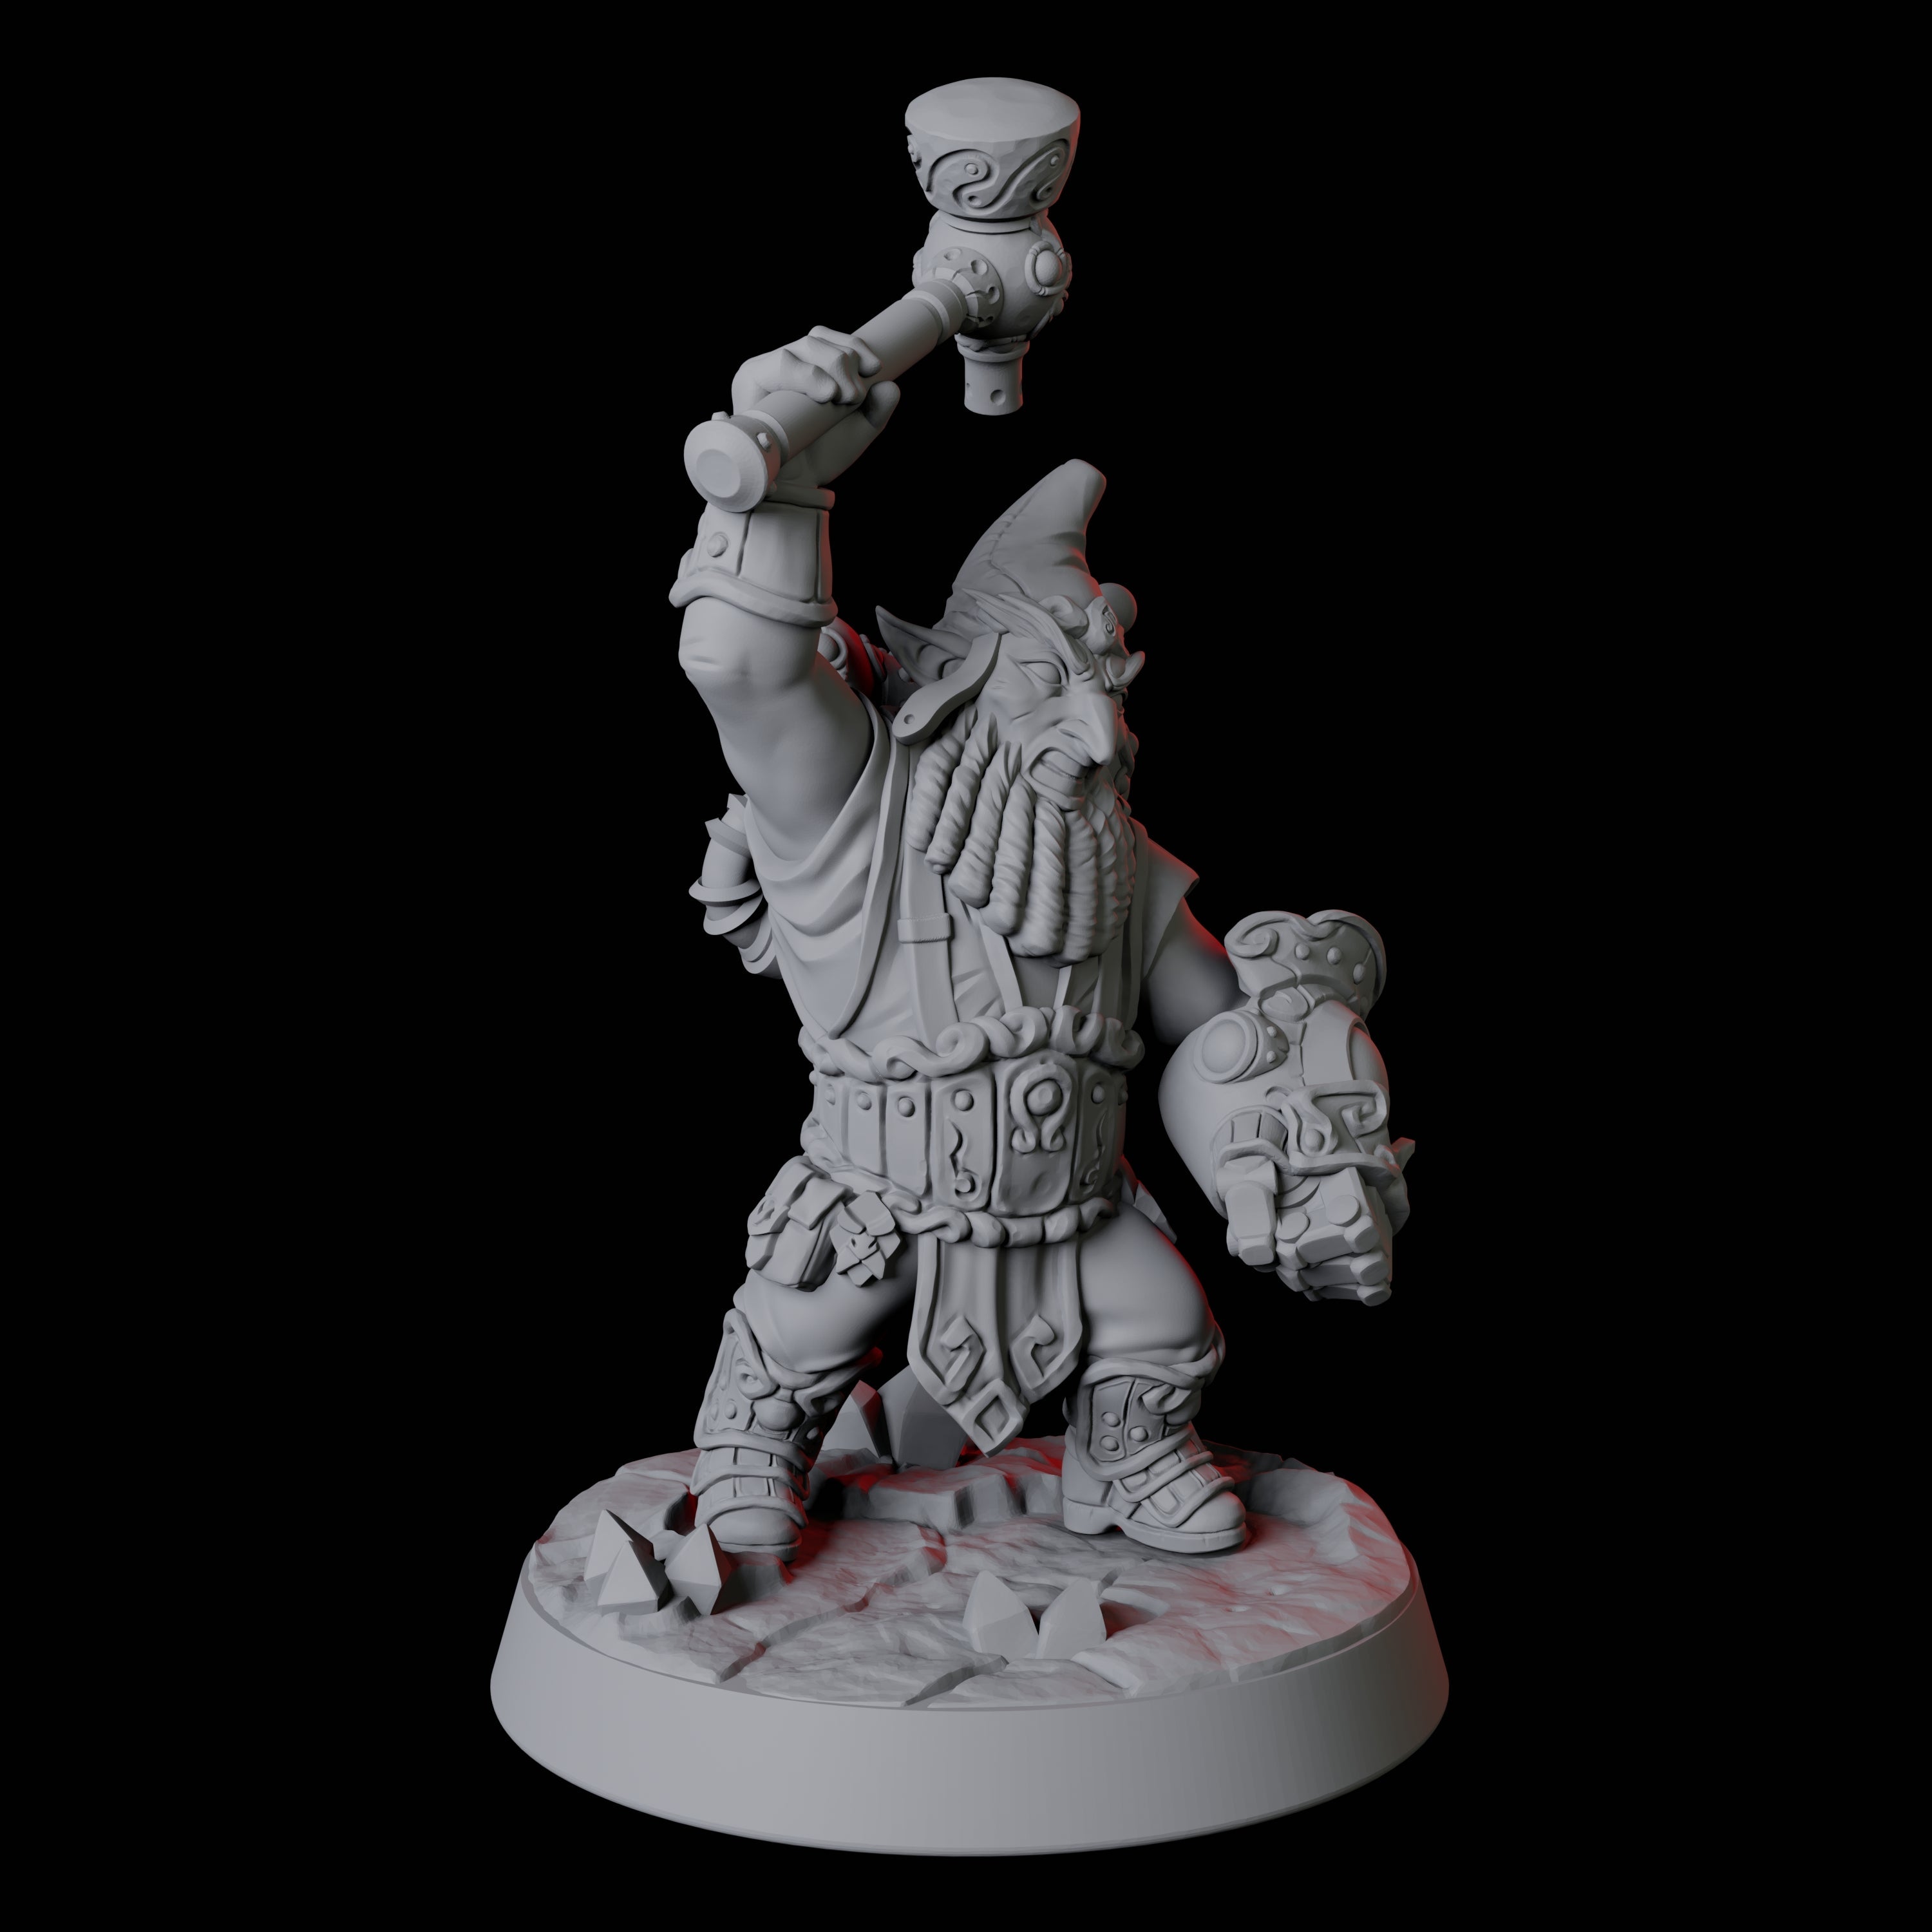 Deep Gnome Artificer C Miniature for Dungeons and Dragons, Pathfinder or other TTRPGs